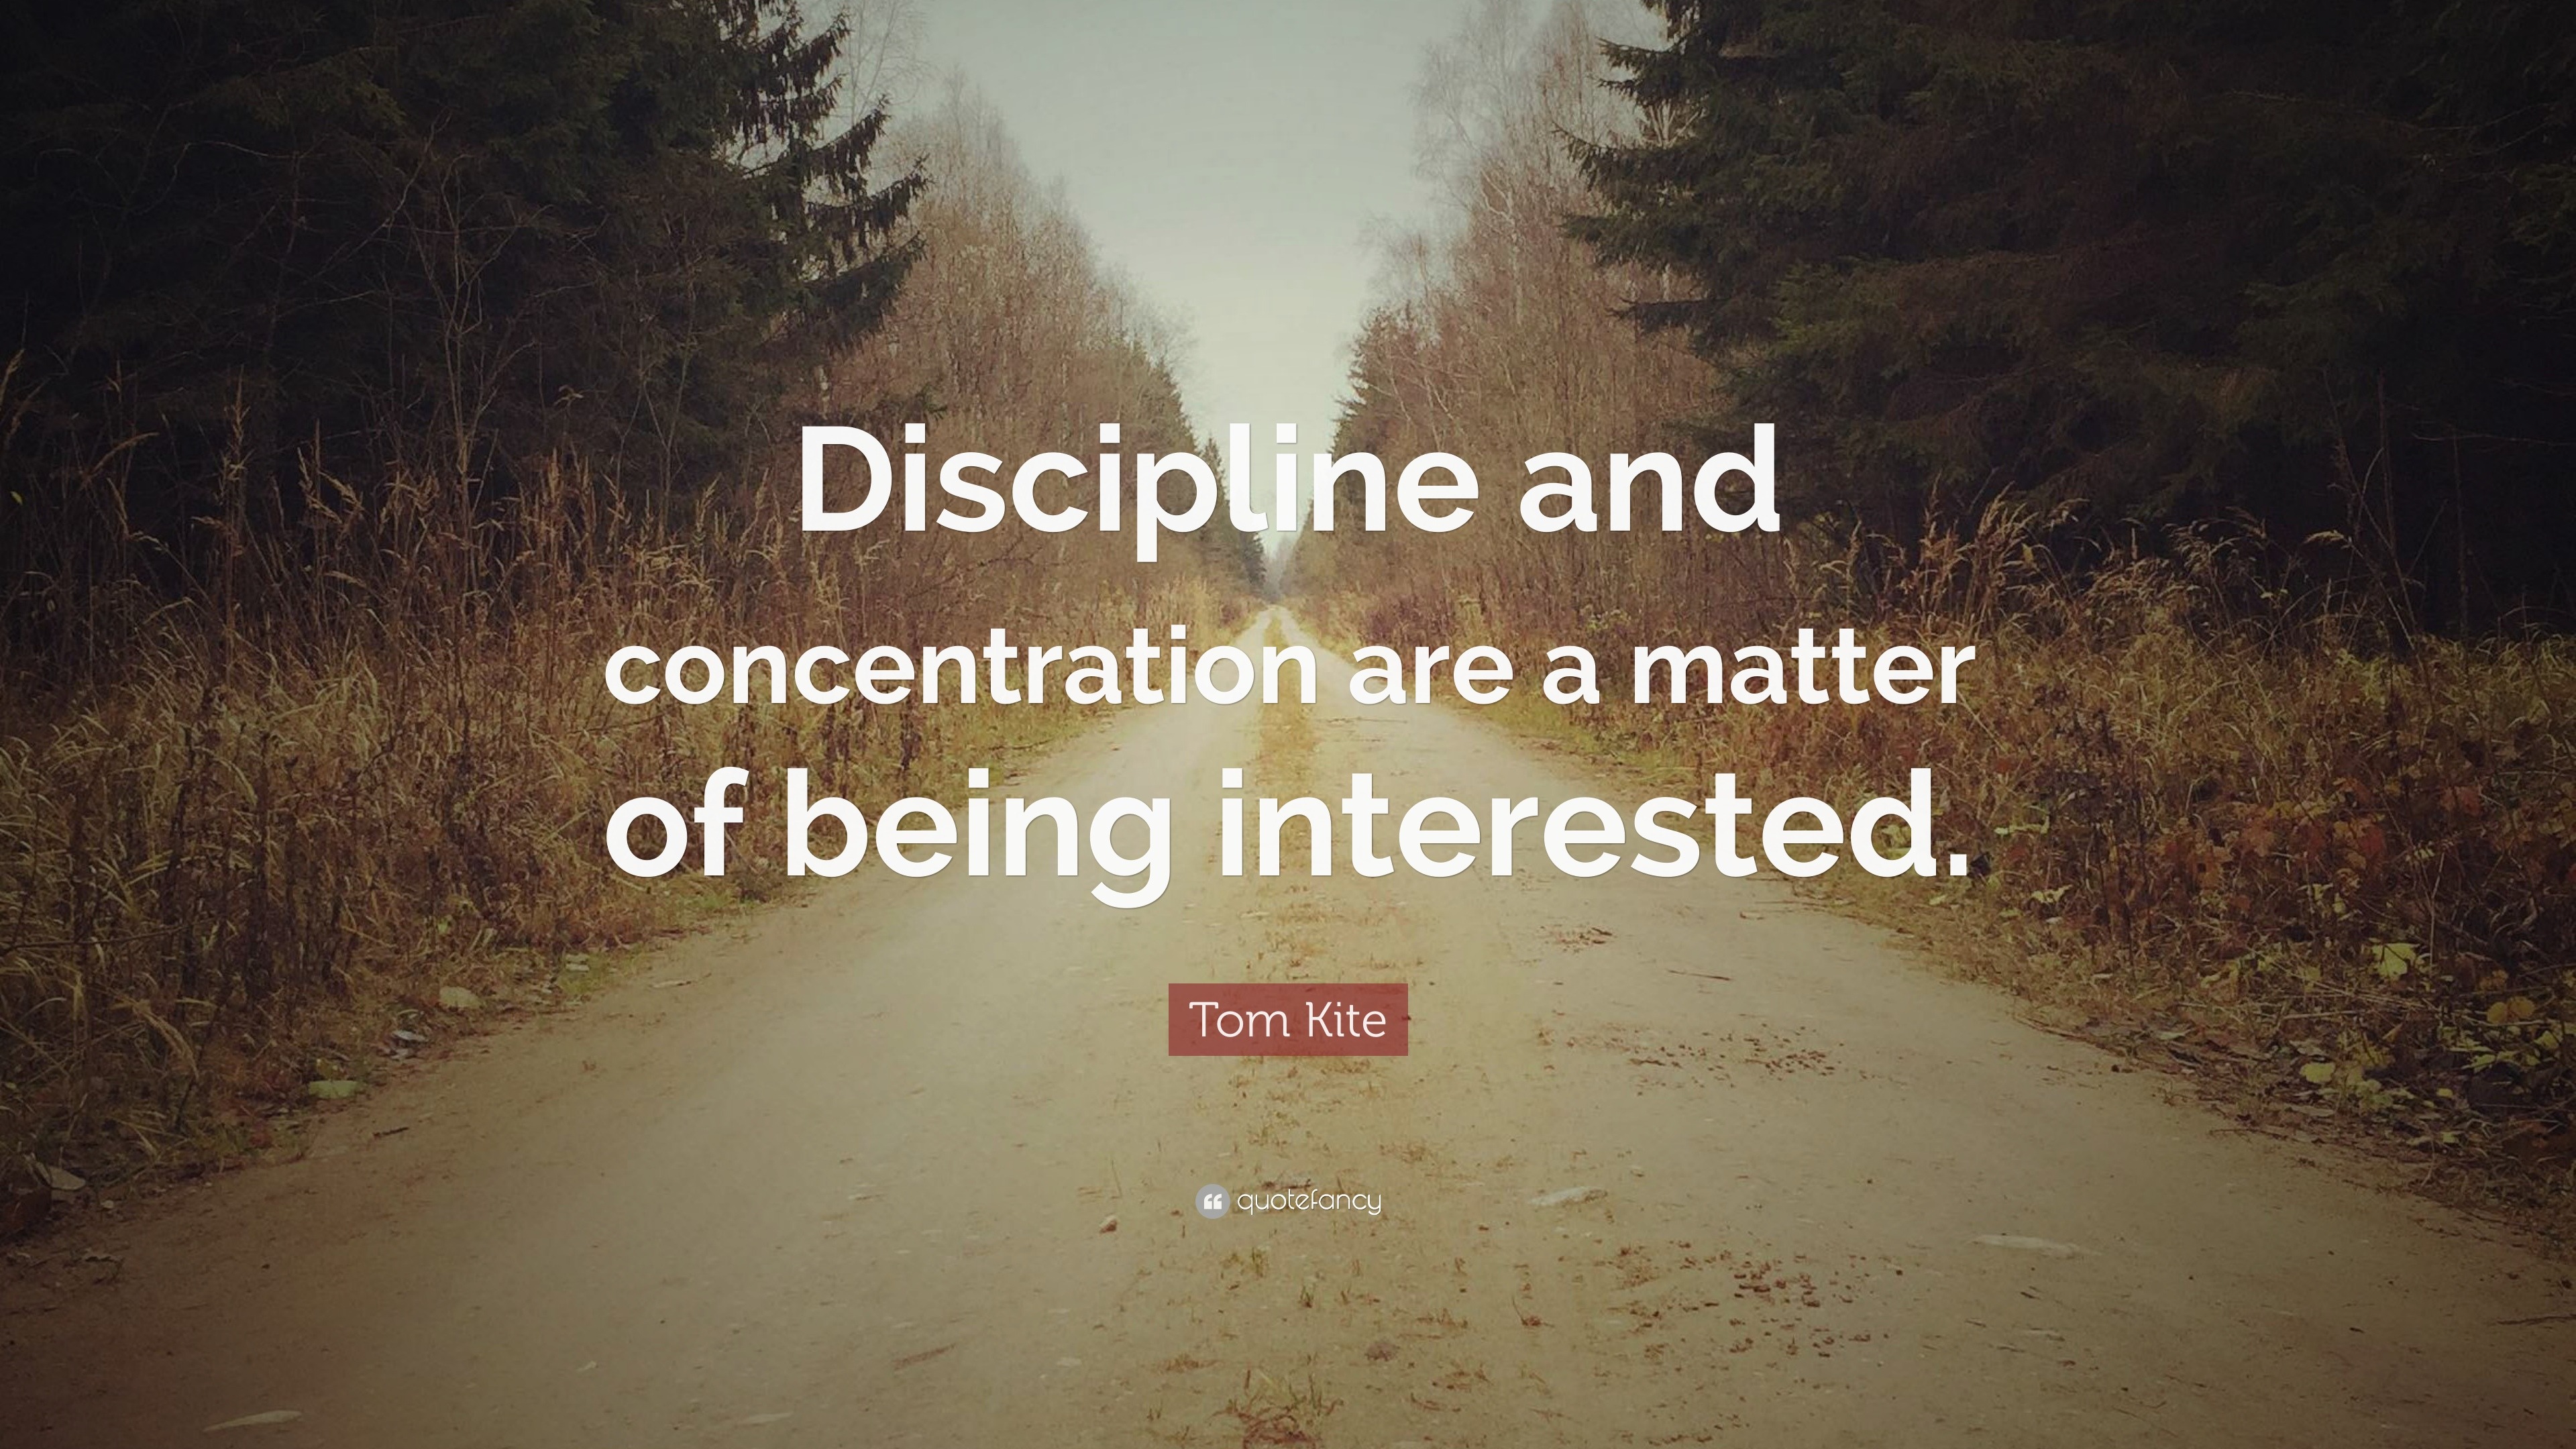 Tom Kite Quote: “Discipline and concentration are a matter of being ...